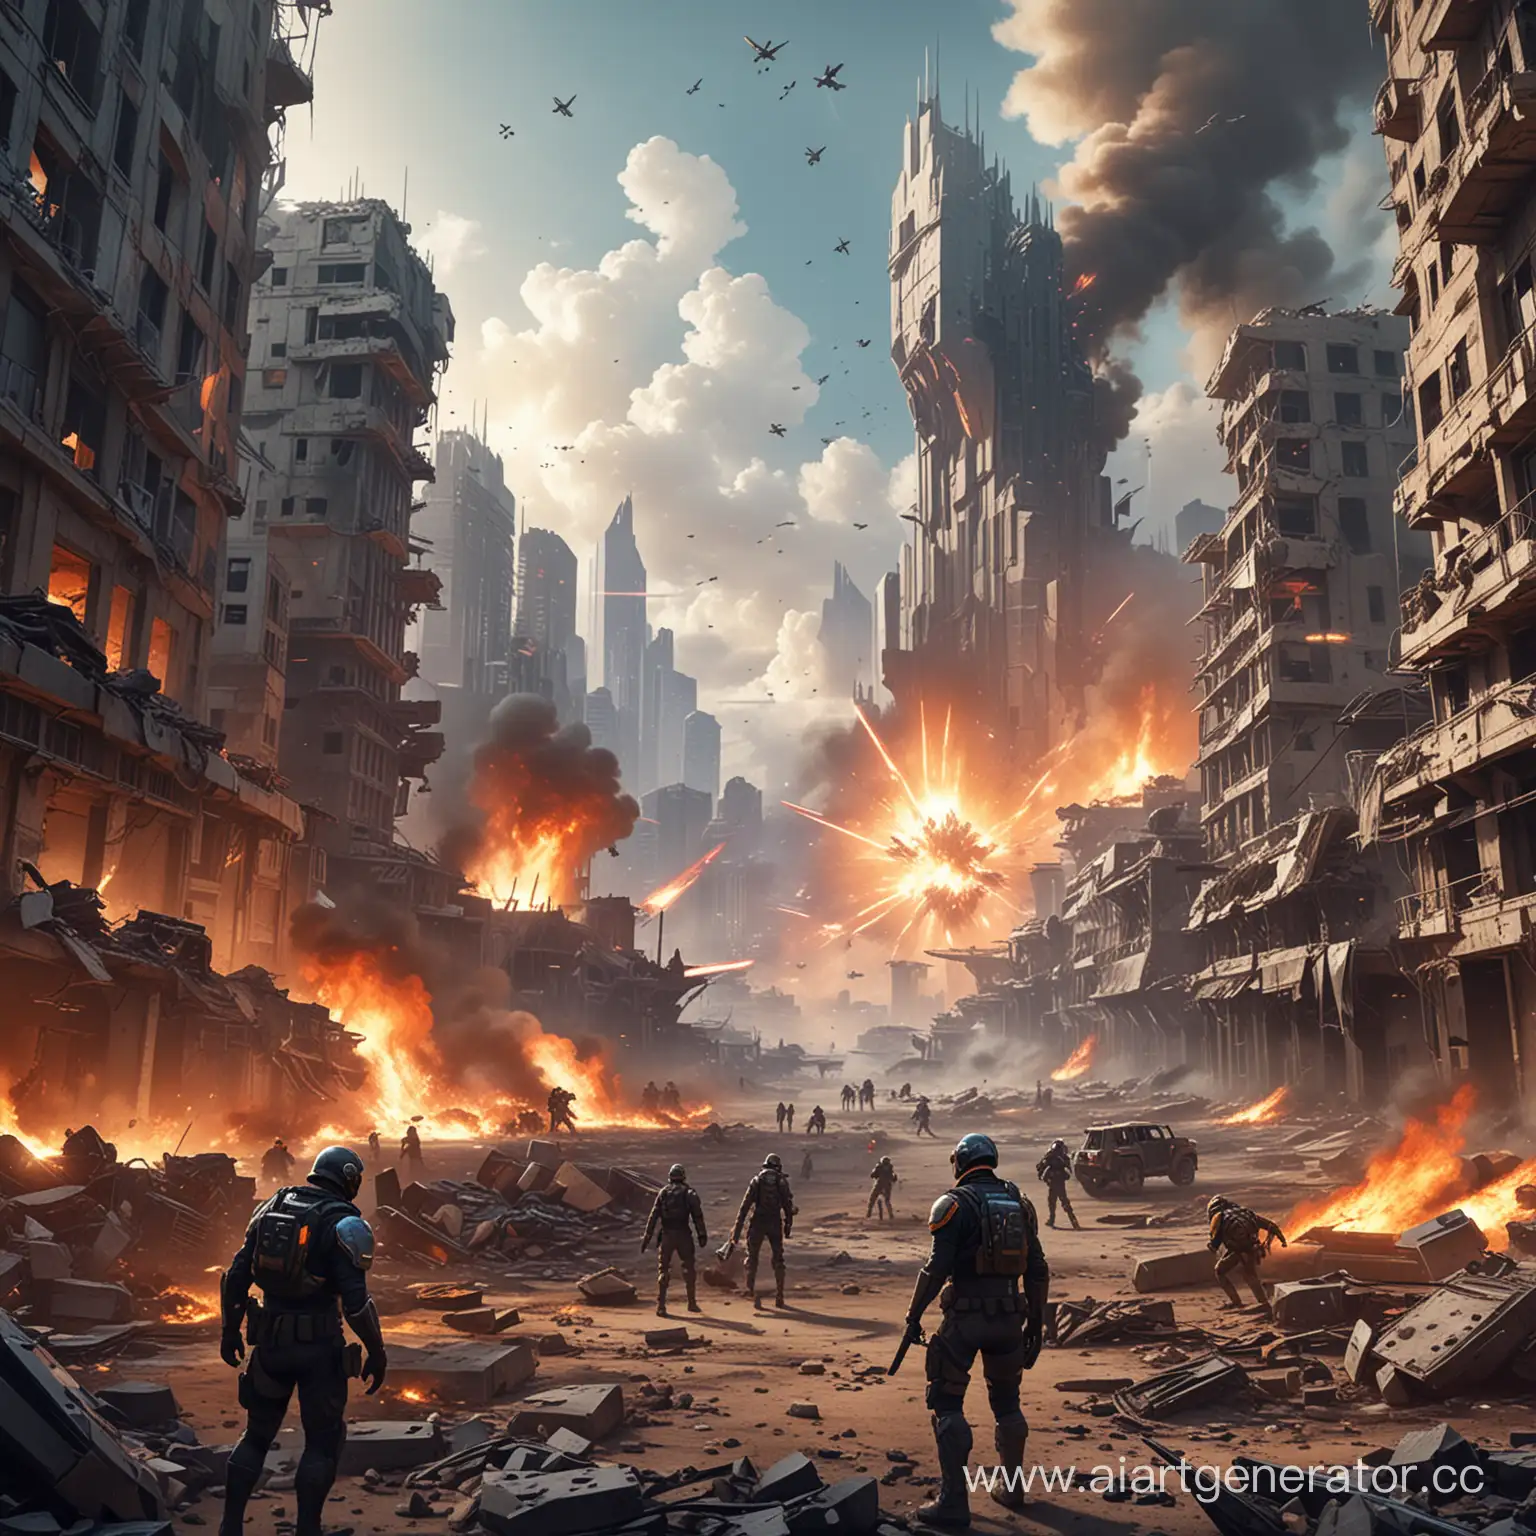 Epic-Valorant-Agents-vs-Radiant-Forces-Battle-in-a-Devastated-Cityscape